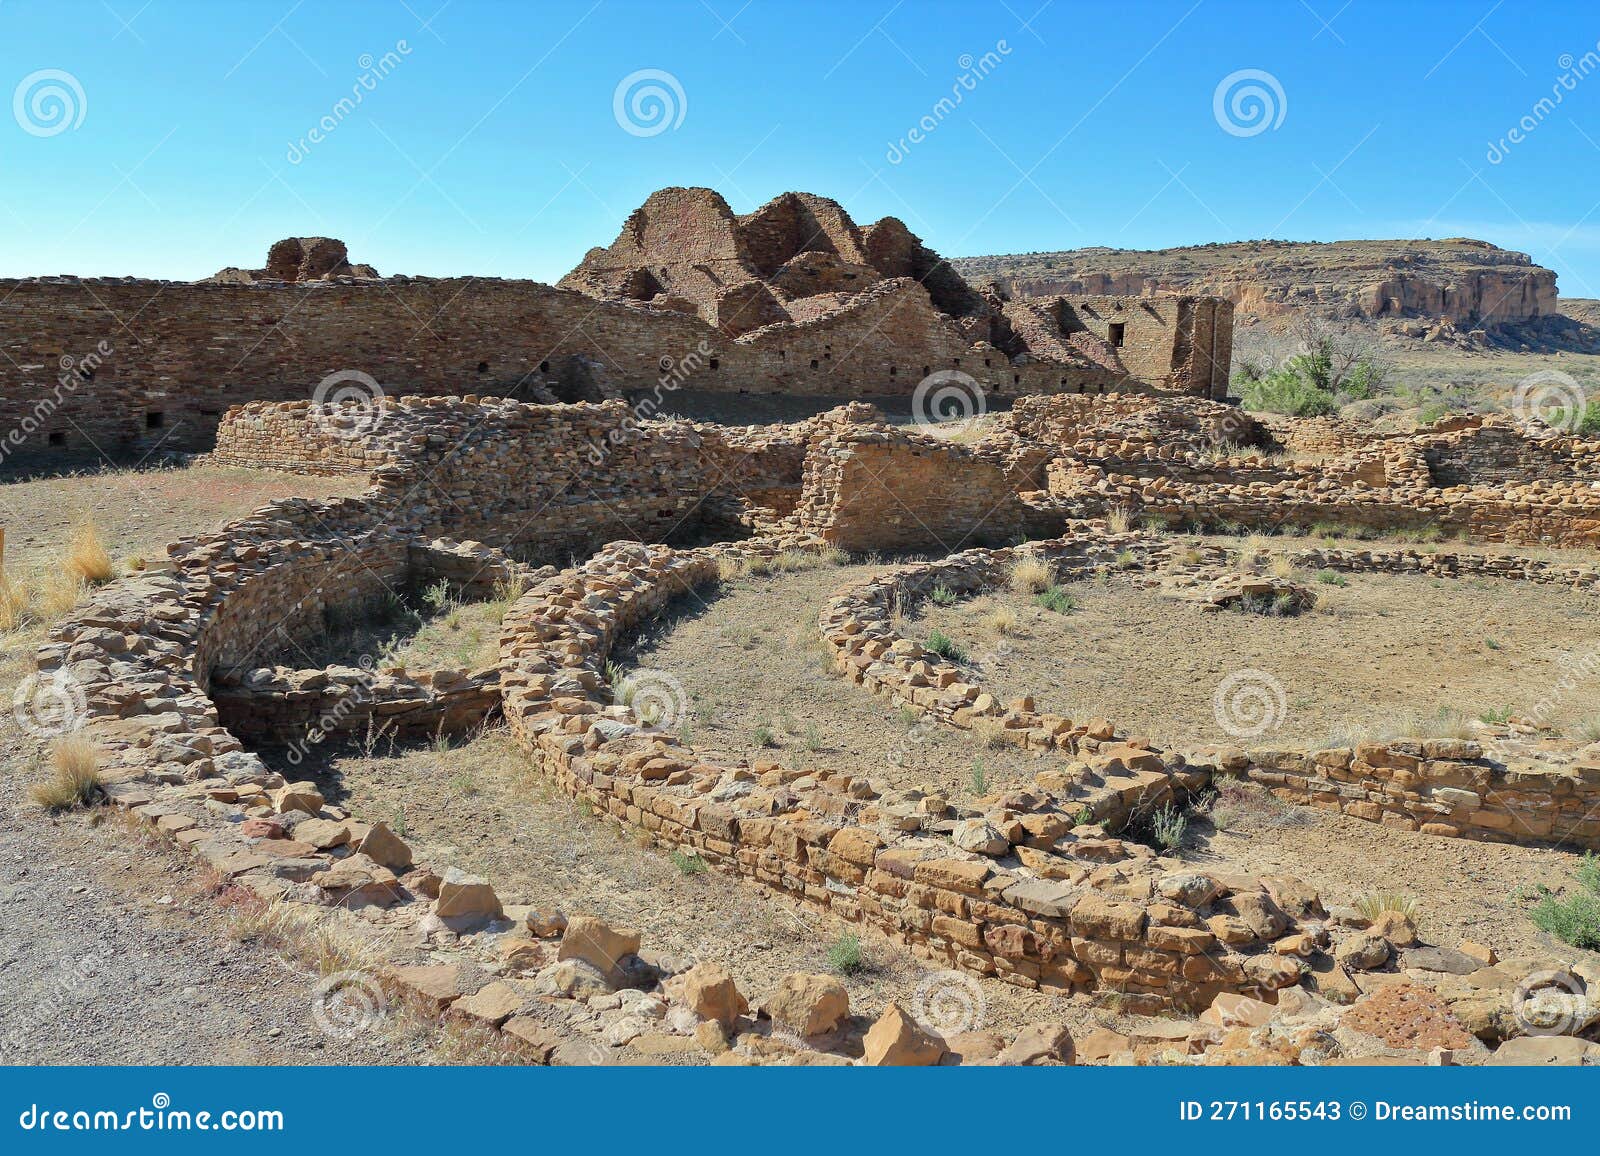 chaco culture national historical park with pueblo del arroyo ruins in canyon, southwest desert, new mexico